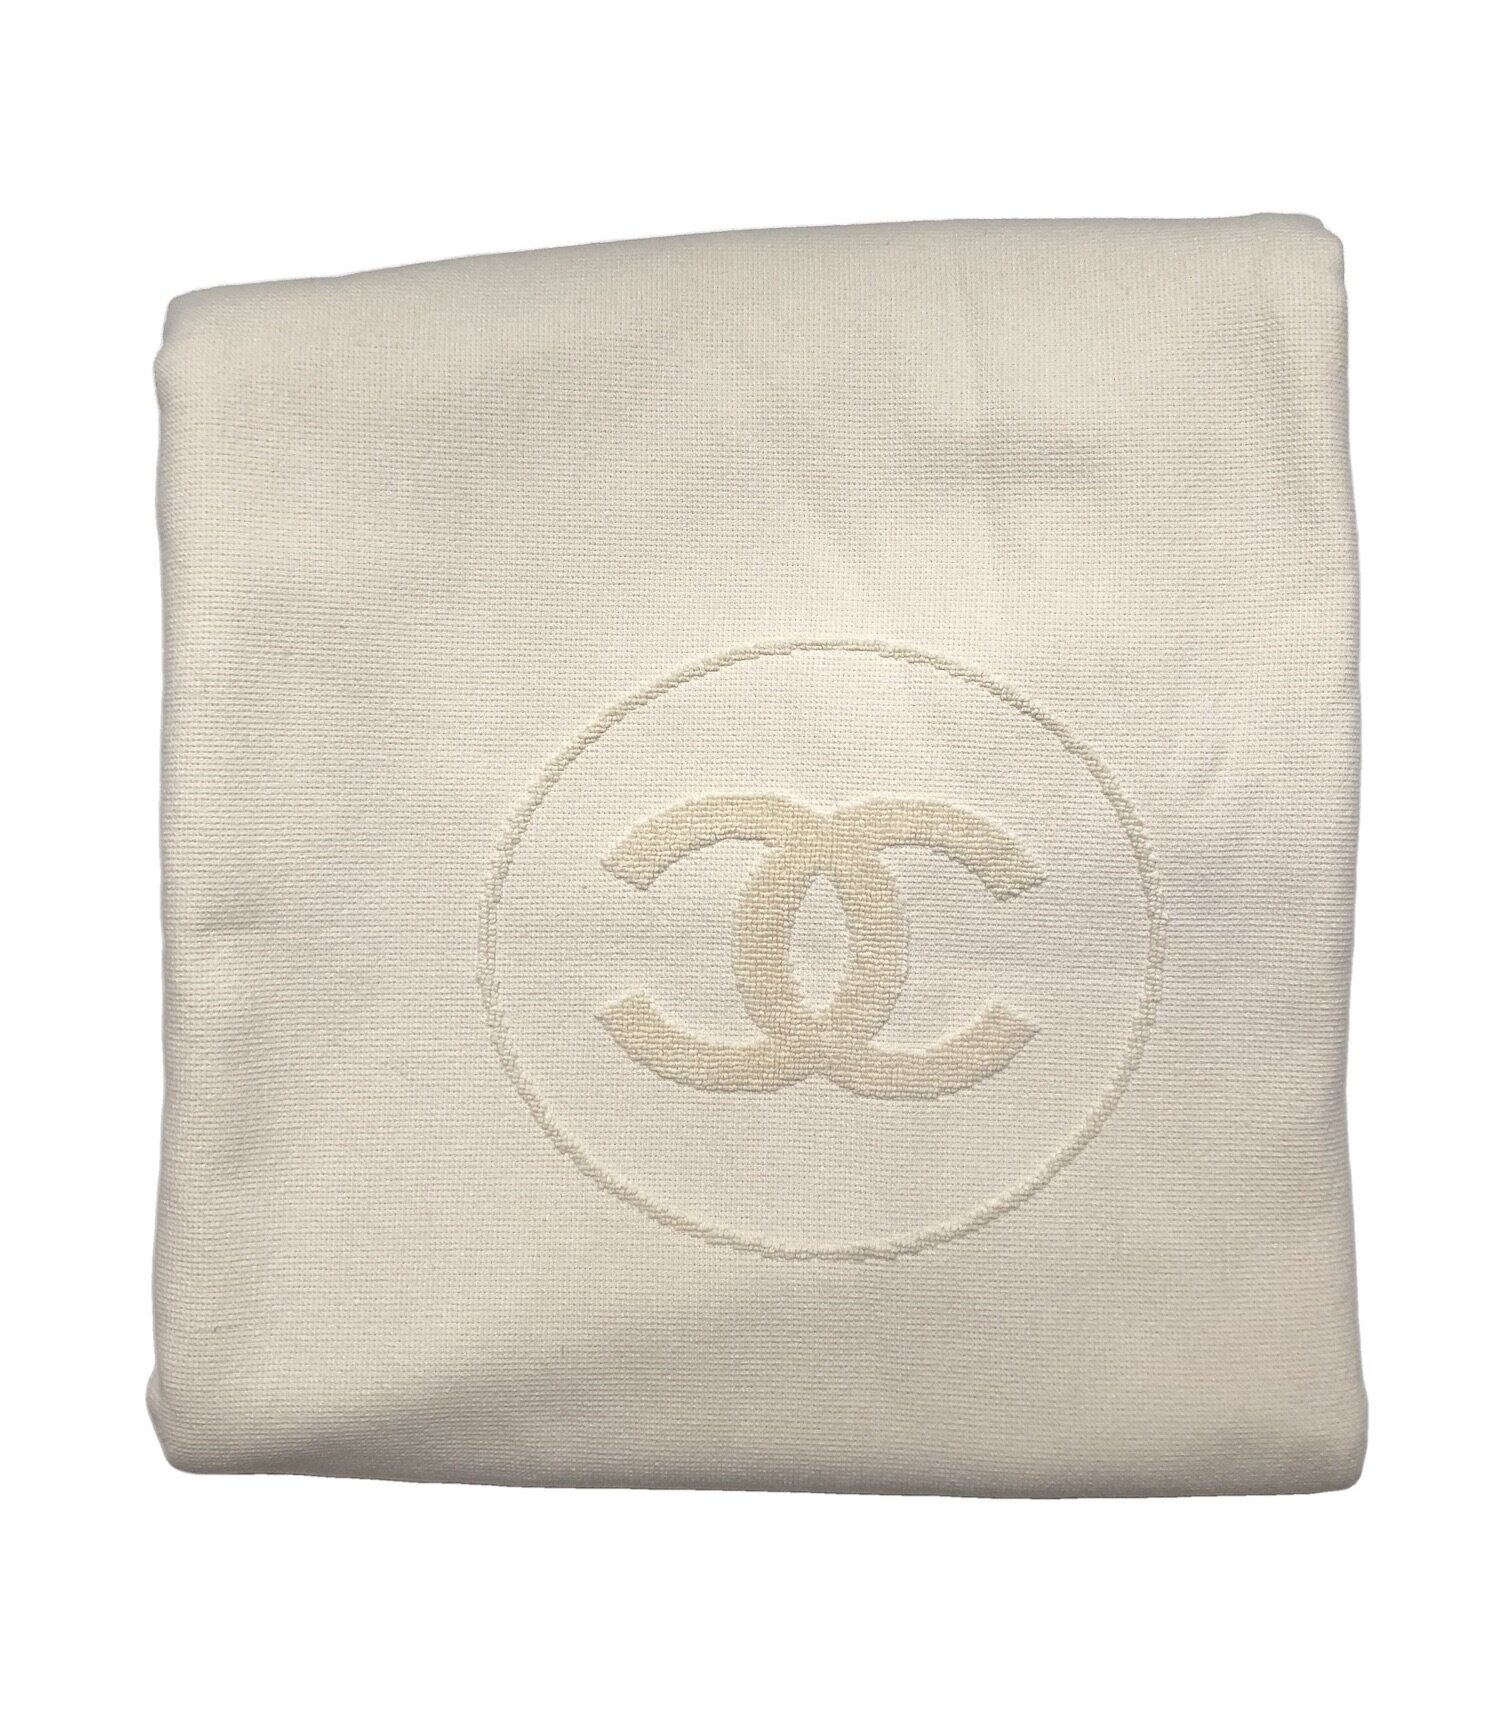 Rhinestone gold chanel logo/White color hands towels 2 size 16in x 32in one  small 13x13inch